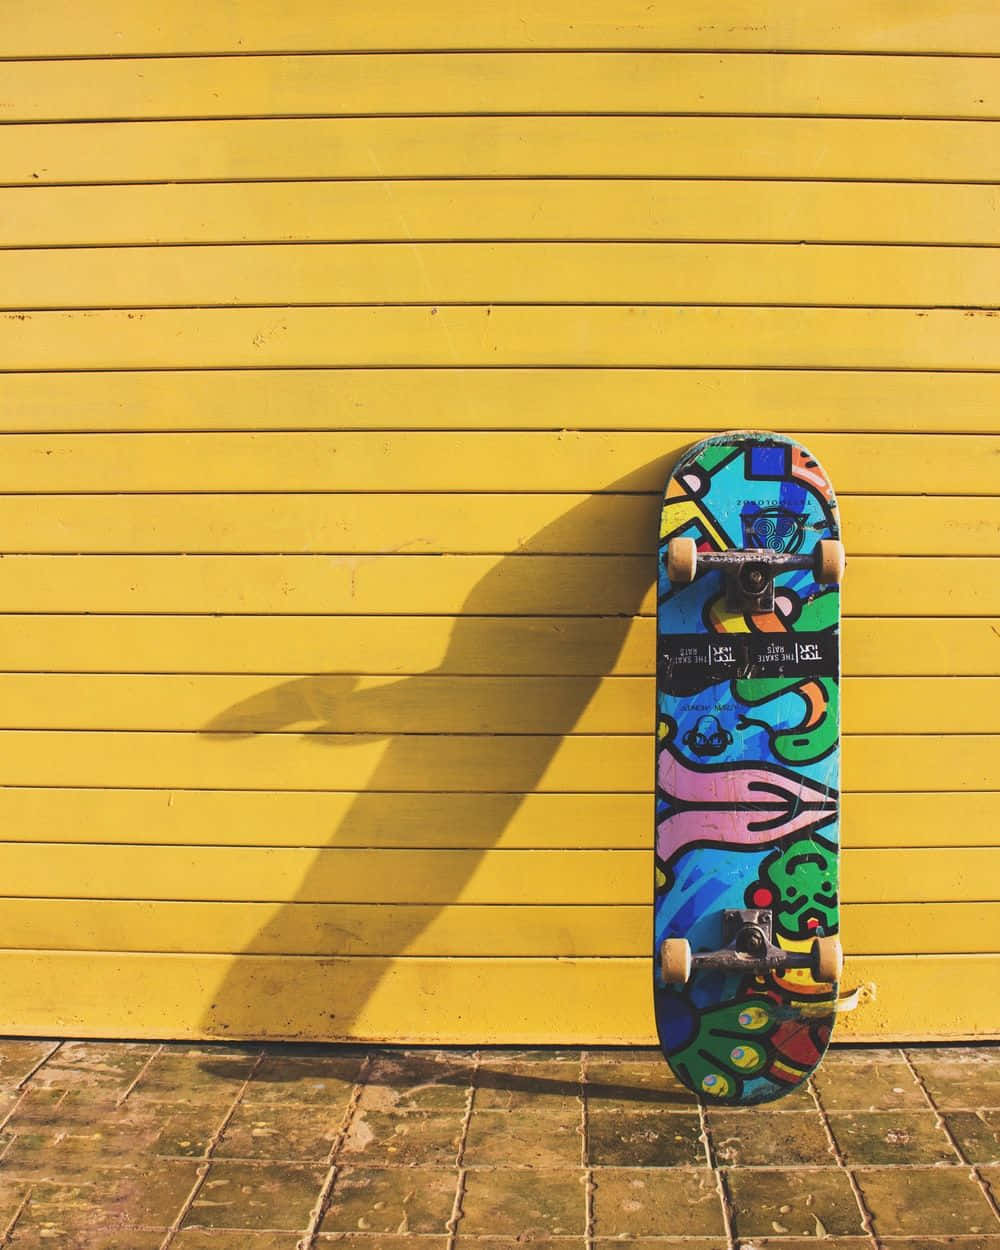 Colorful Skateboard Against Yellow Wall Background